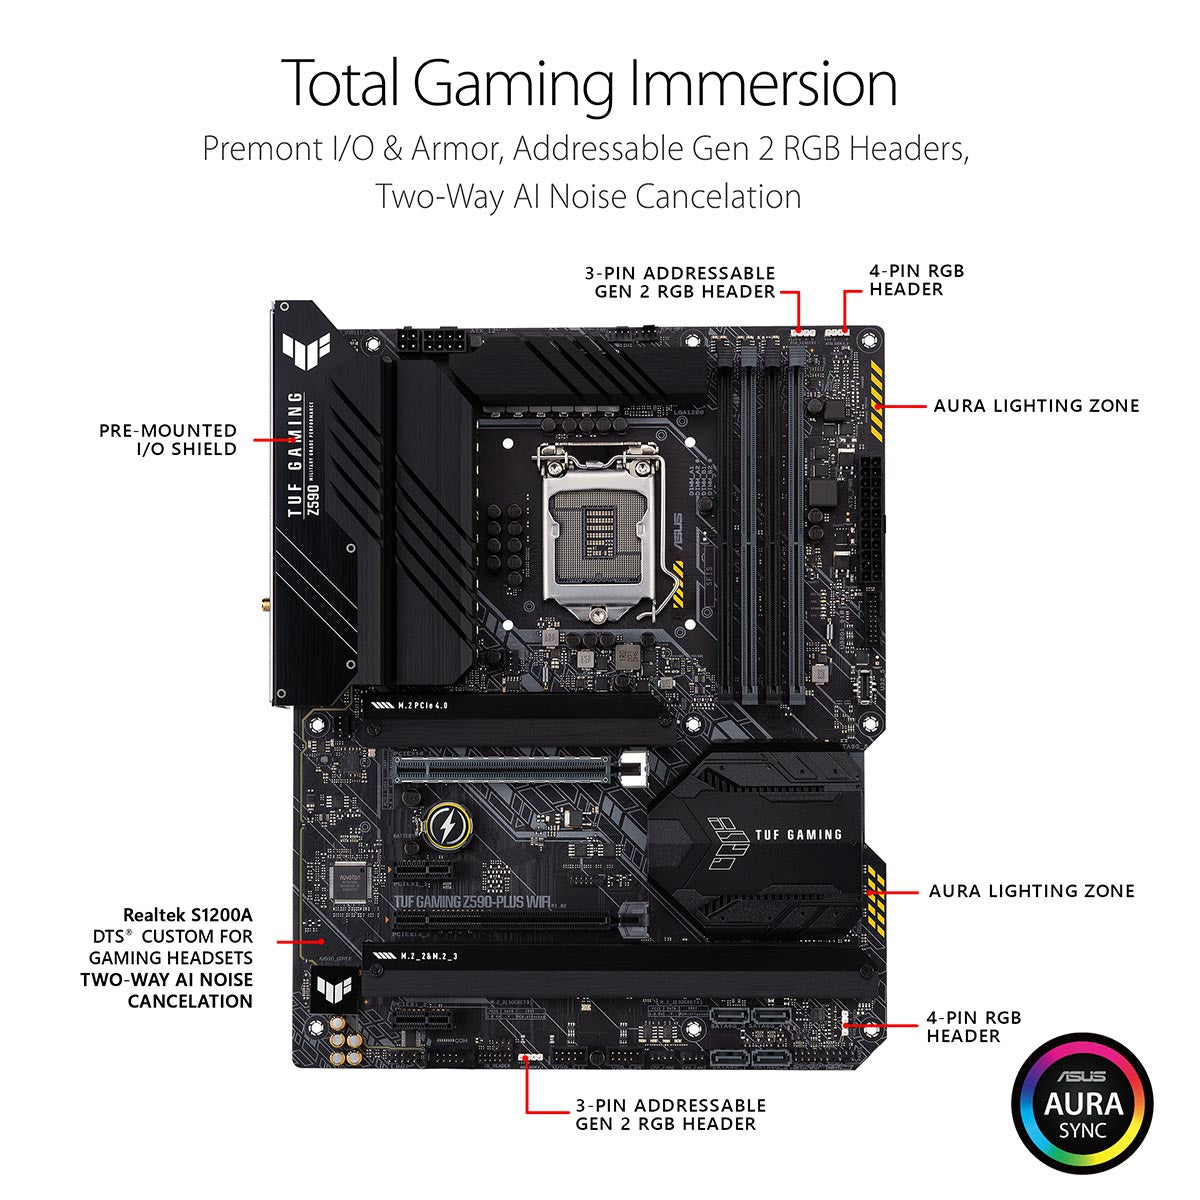 [RePacked] ASUS TUF Gaming Z590-Plus WIFI ATX Motherboard with AI Noise Cancelation